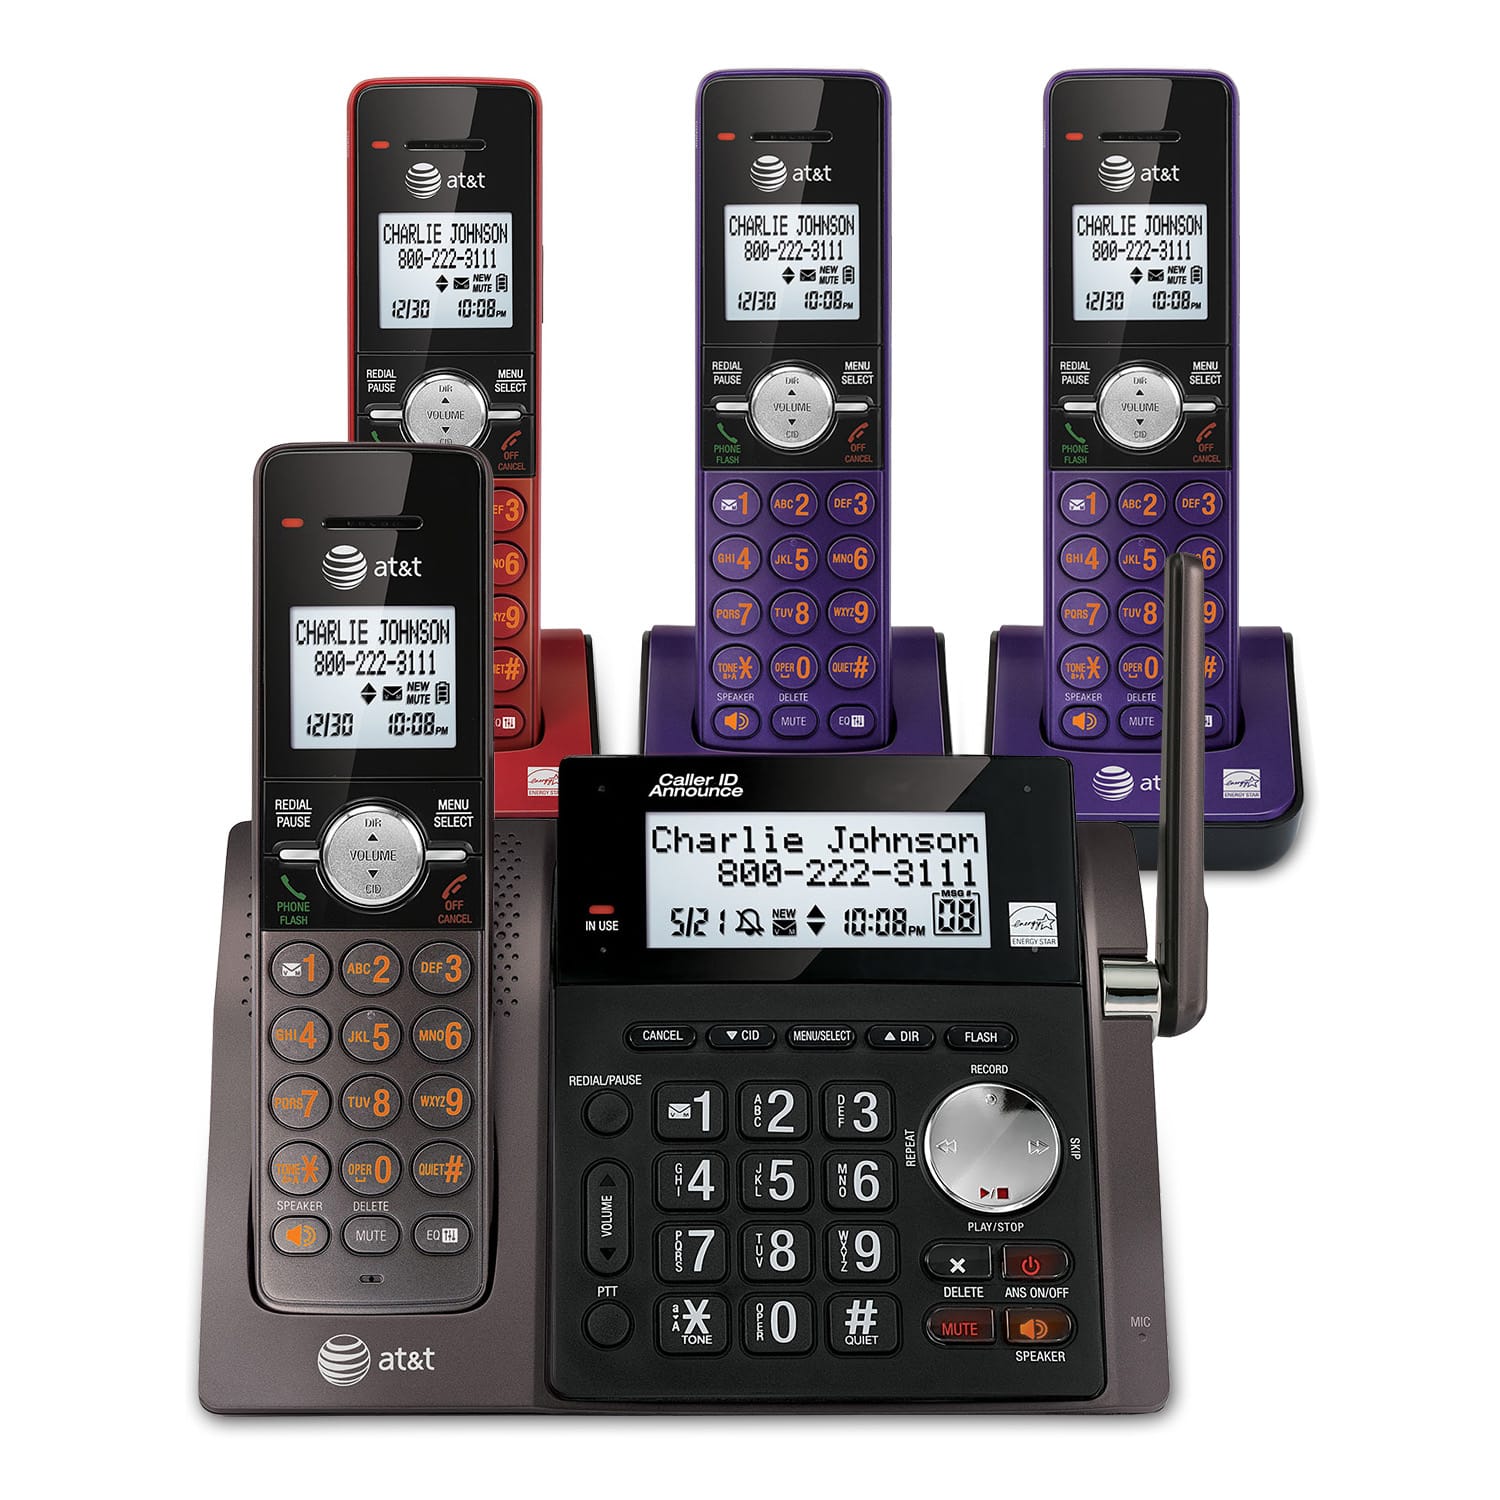 4 handset cordless answering system with caller ID/call waiting - view 1